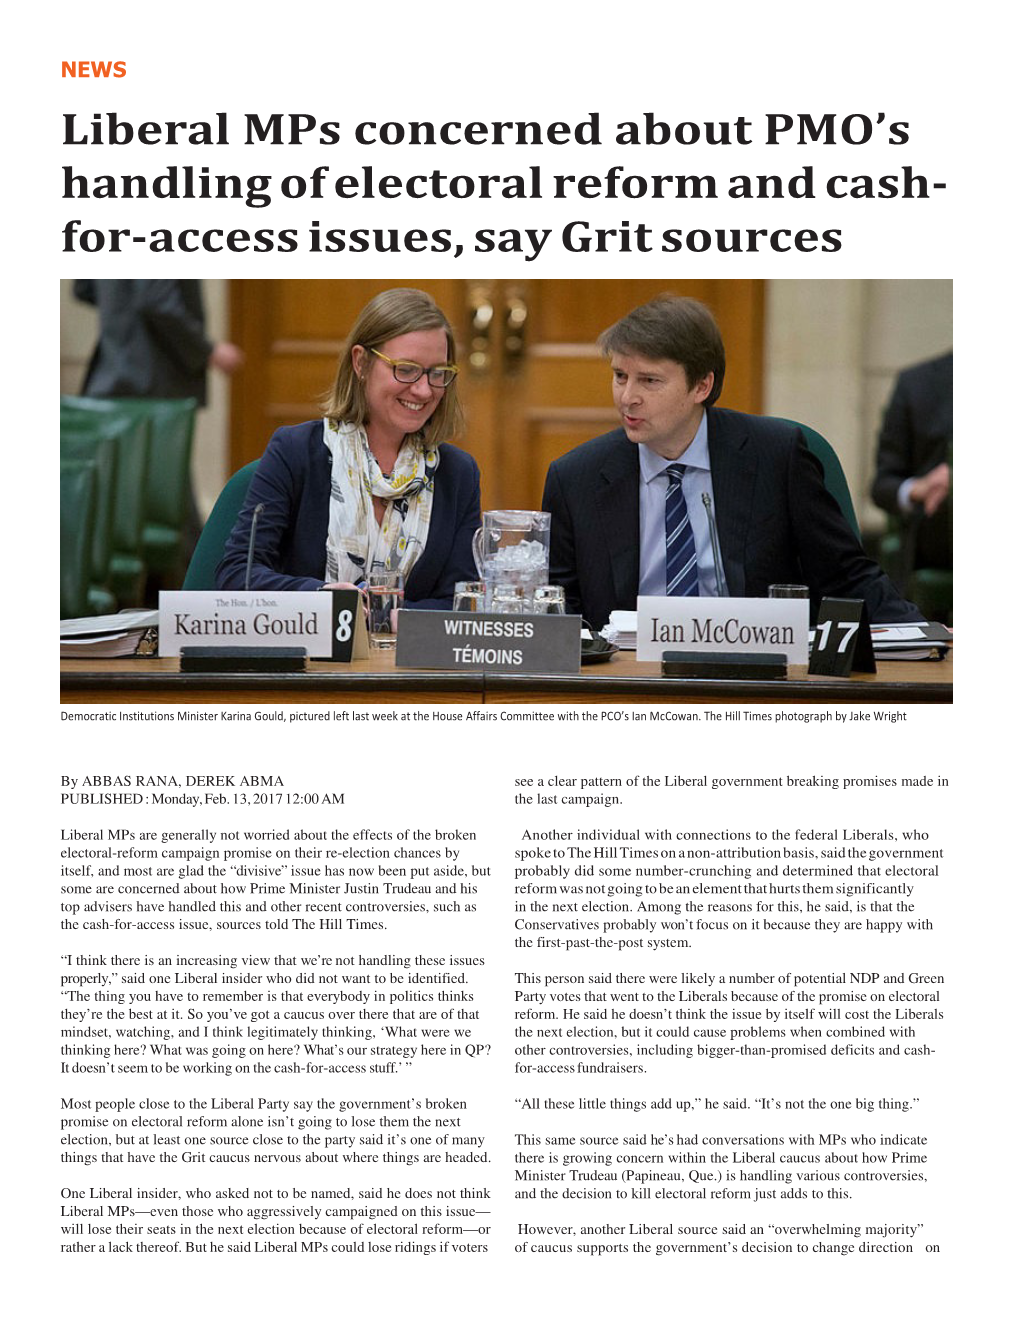 Liberal Mps Concerned About PMO's Handling of Electoral Reform and Cash